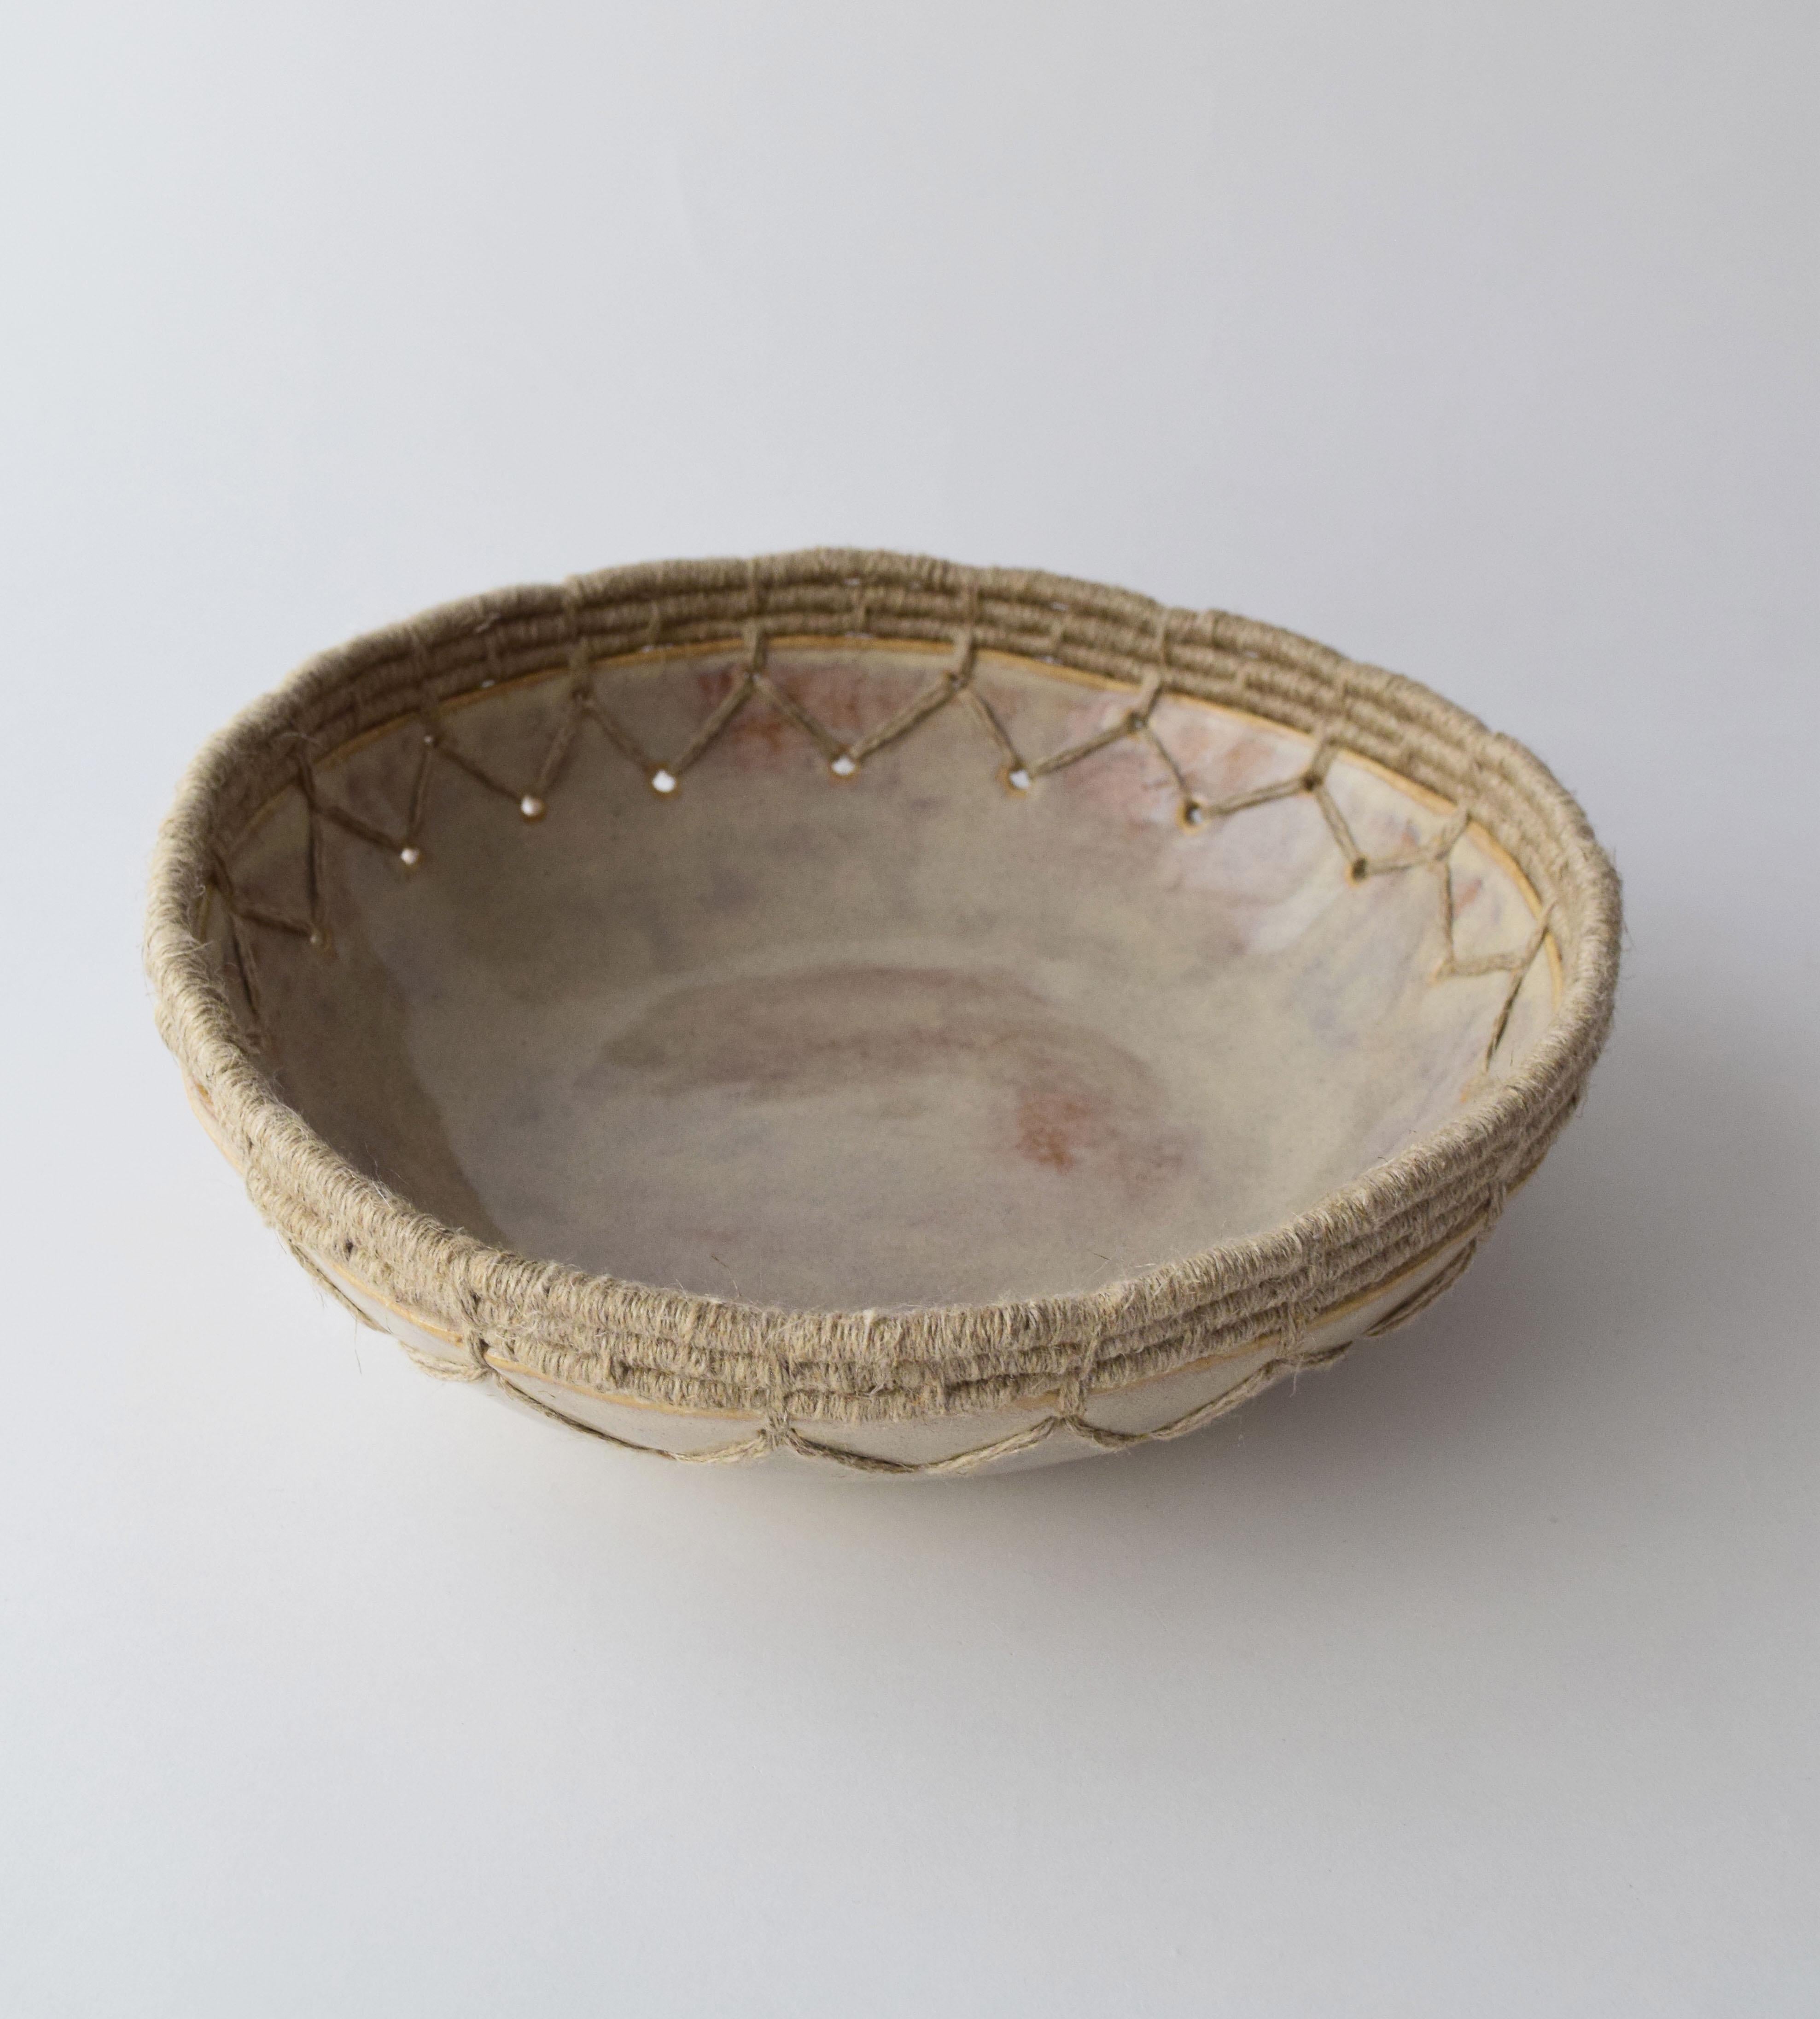 American Decorative Bowl #642 in Gray with Woven Natural Linen Edge Detail